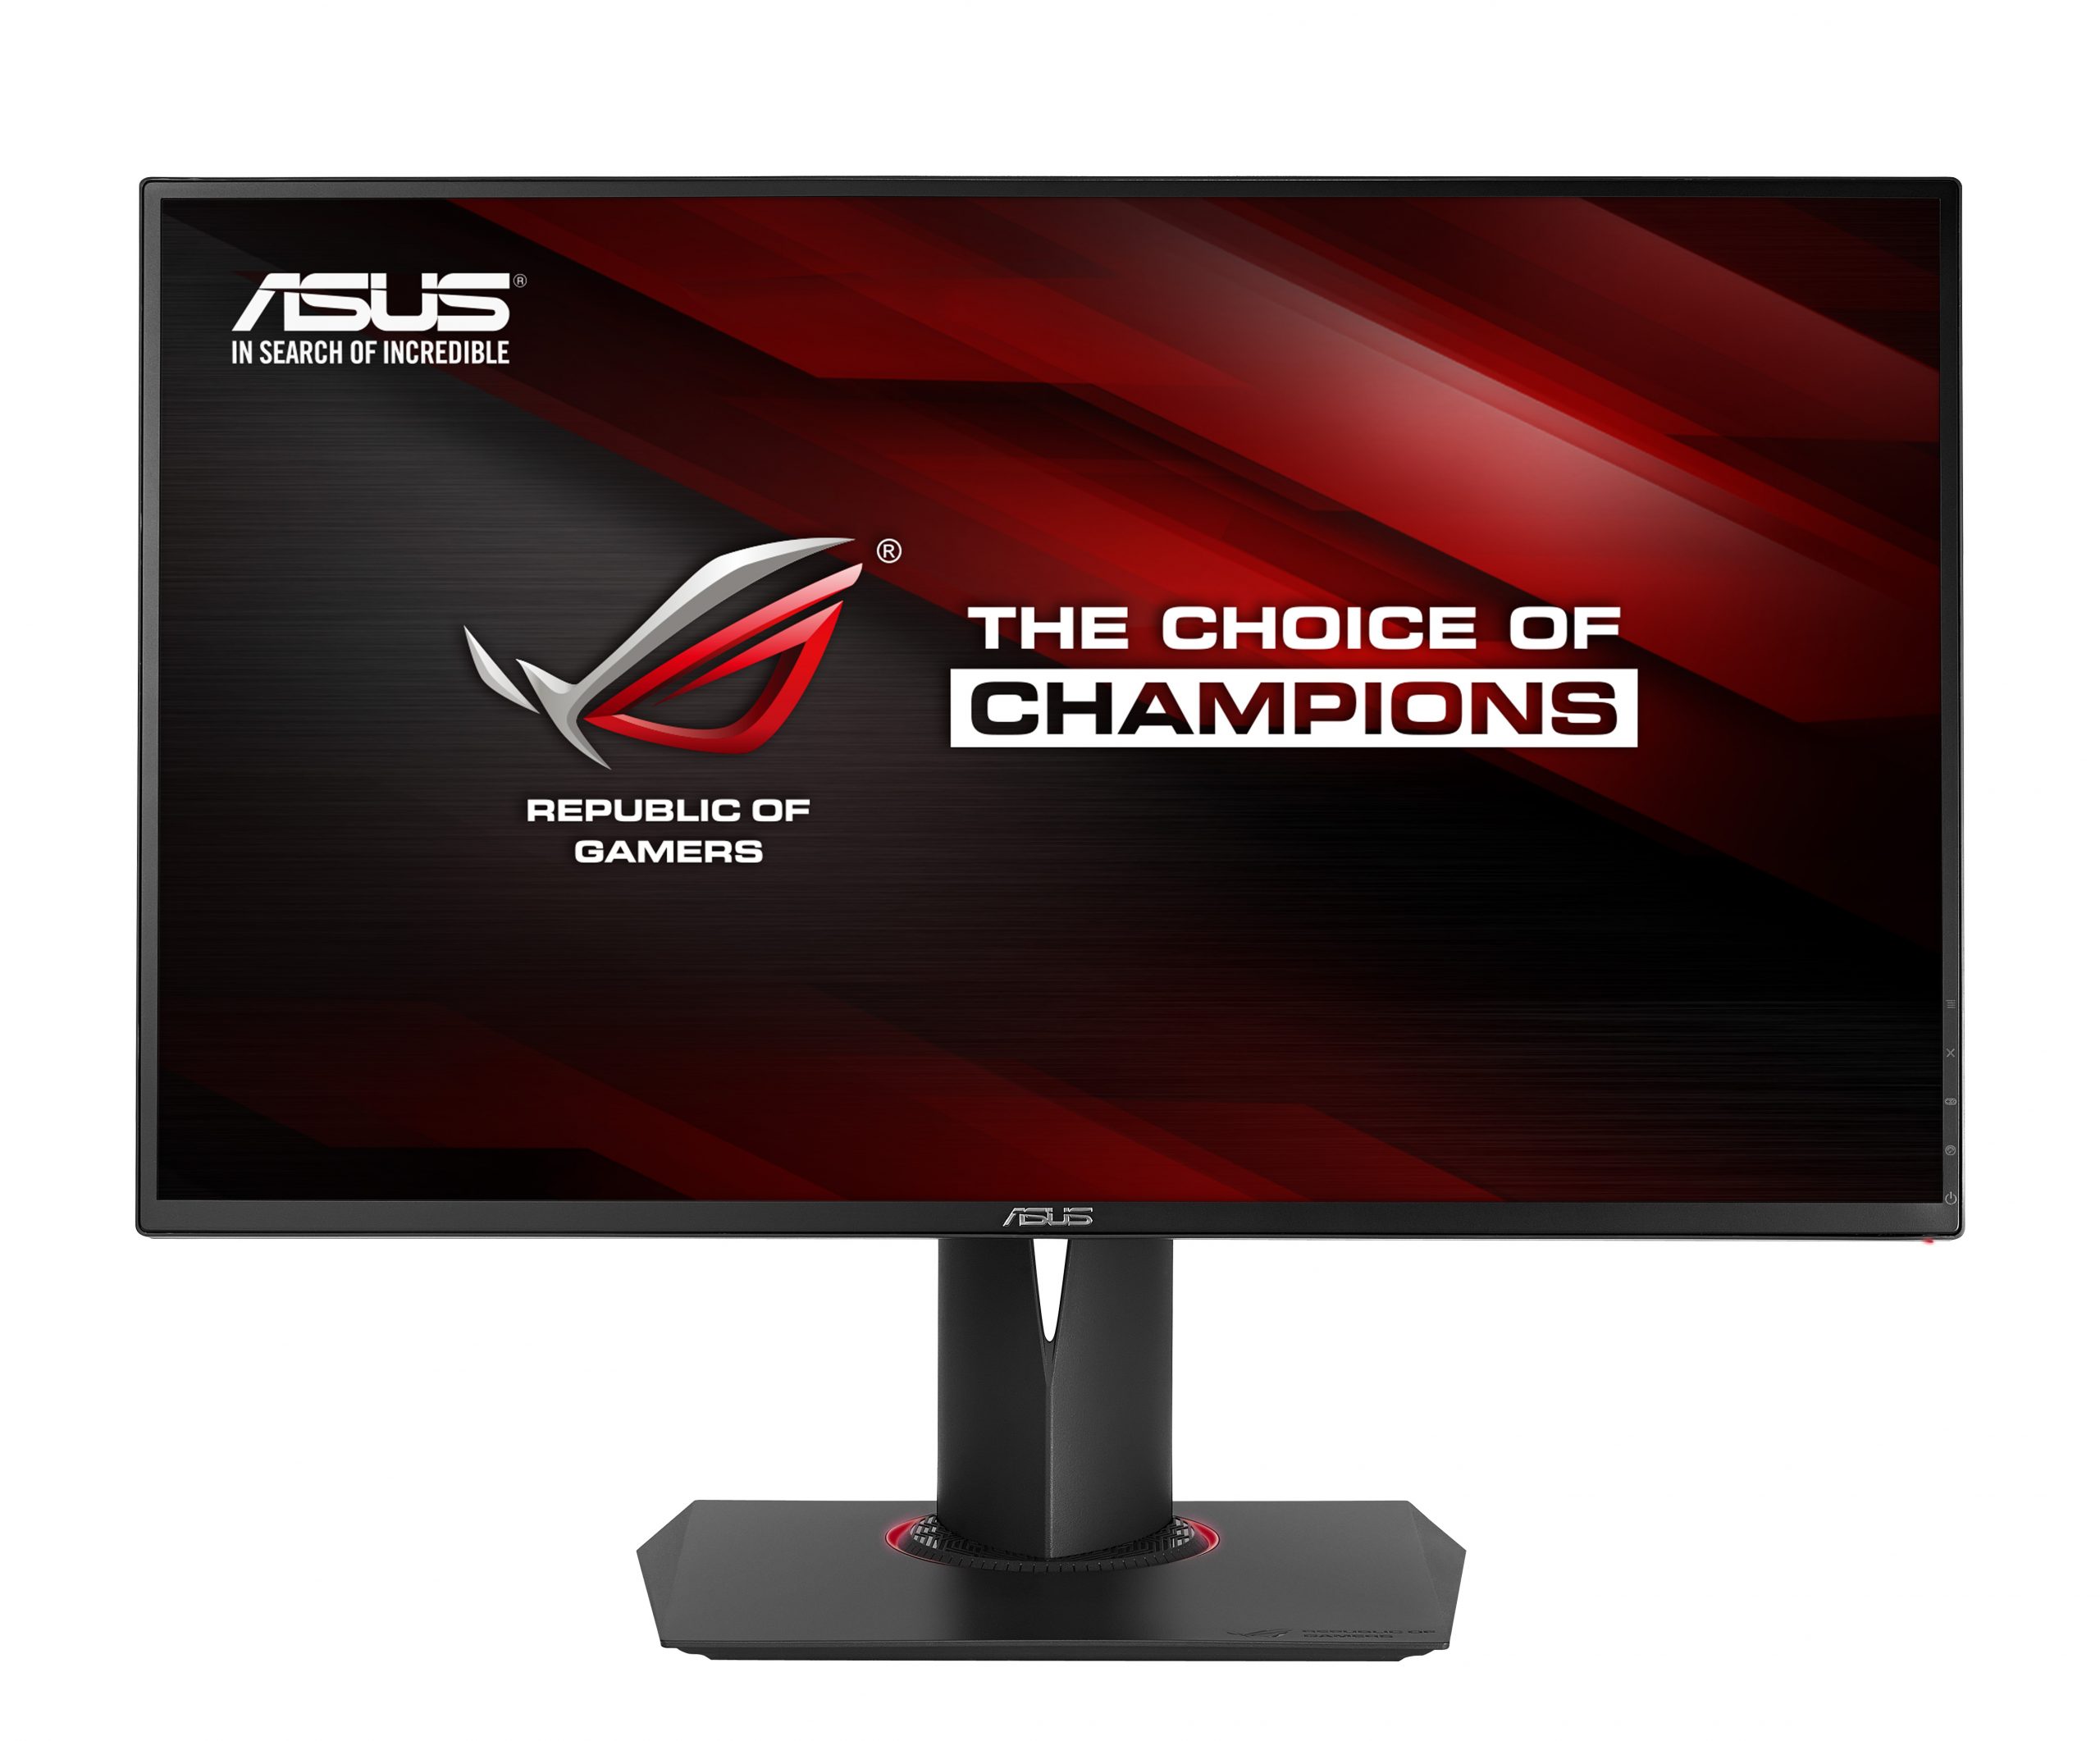 CES 2015: ASUS 27-inch ROG Swift PG27AQ 4K Gaming Monitor with NVIDIA G-SYNC and IPS